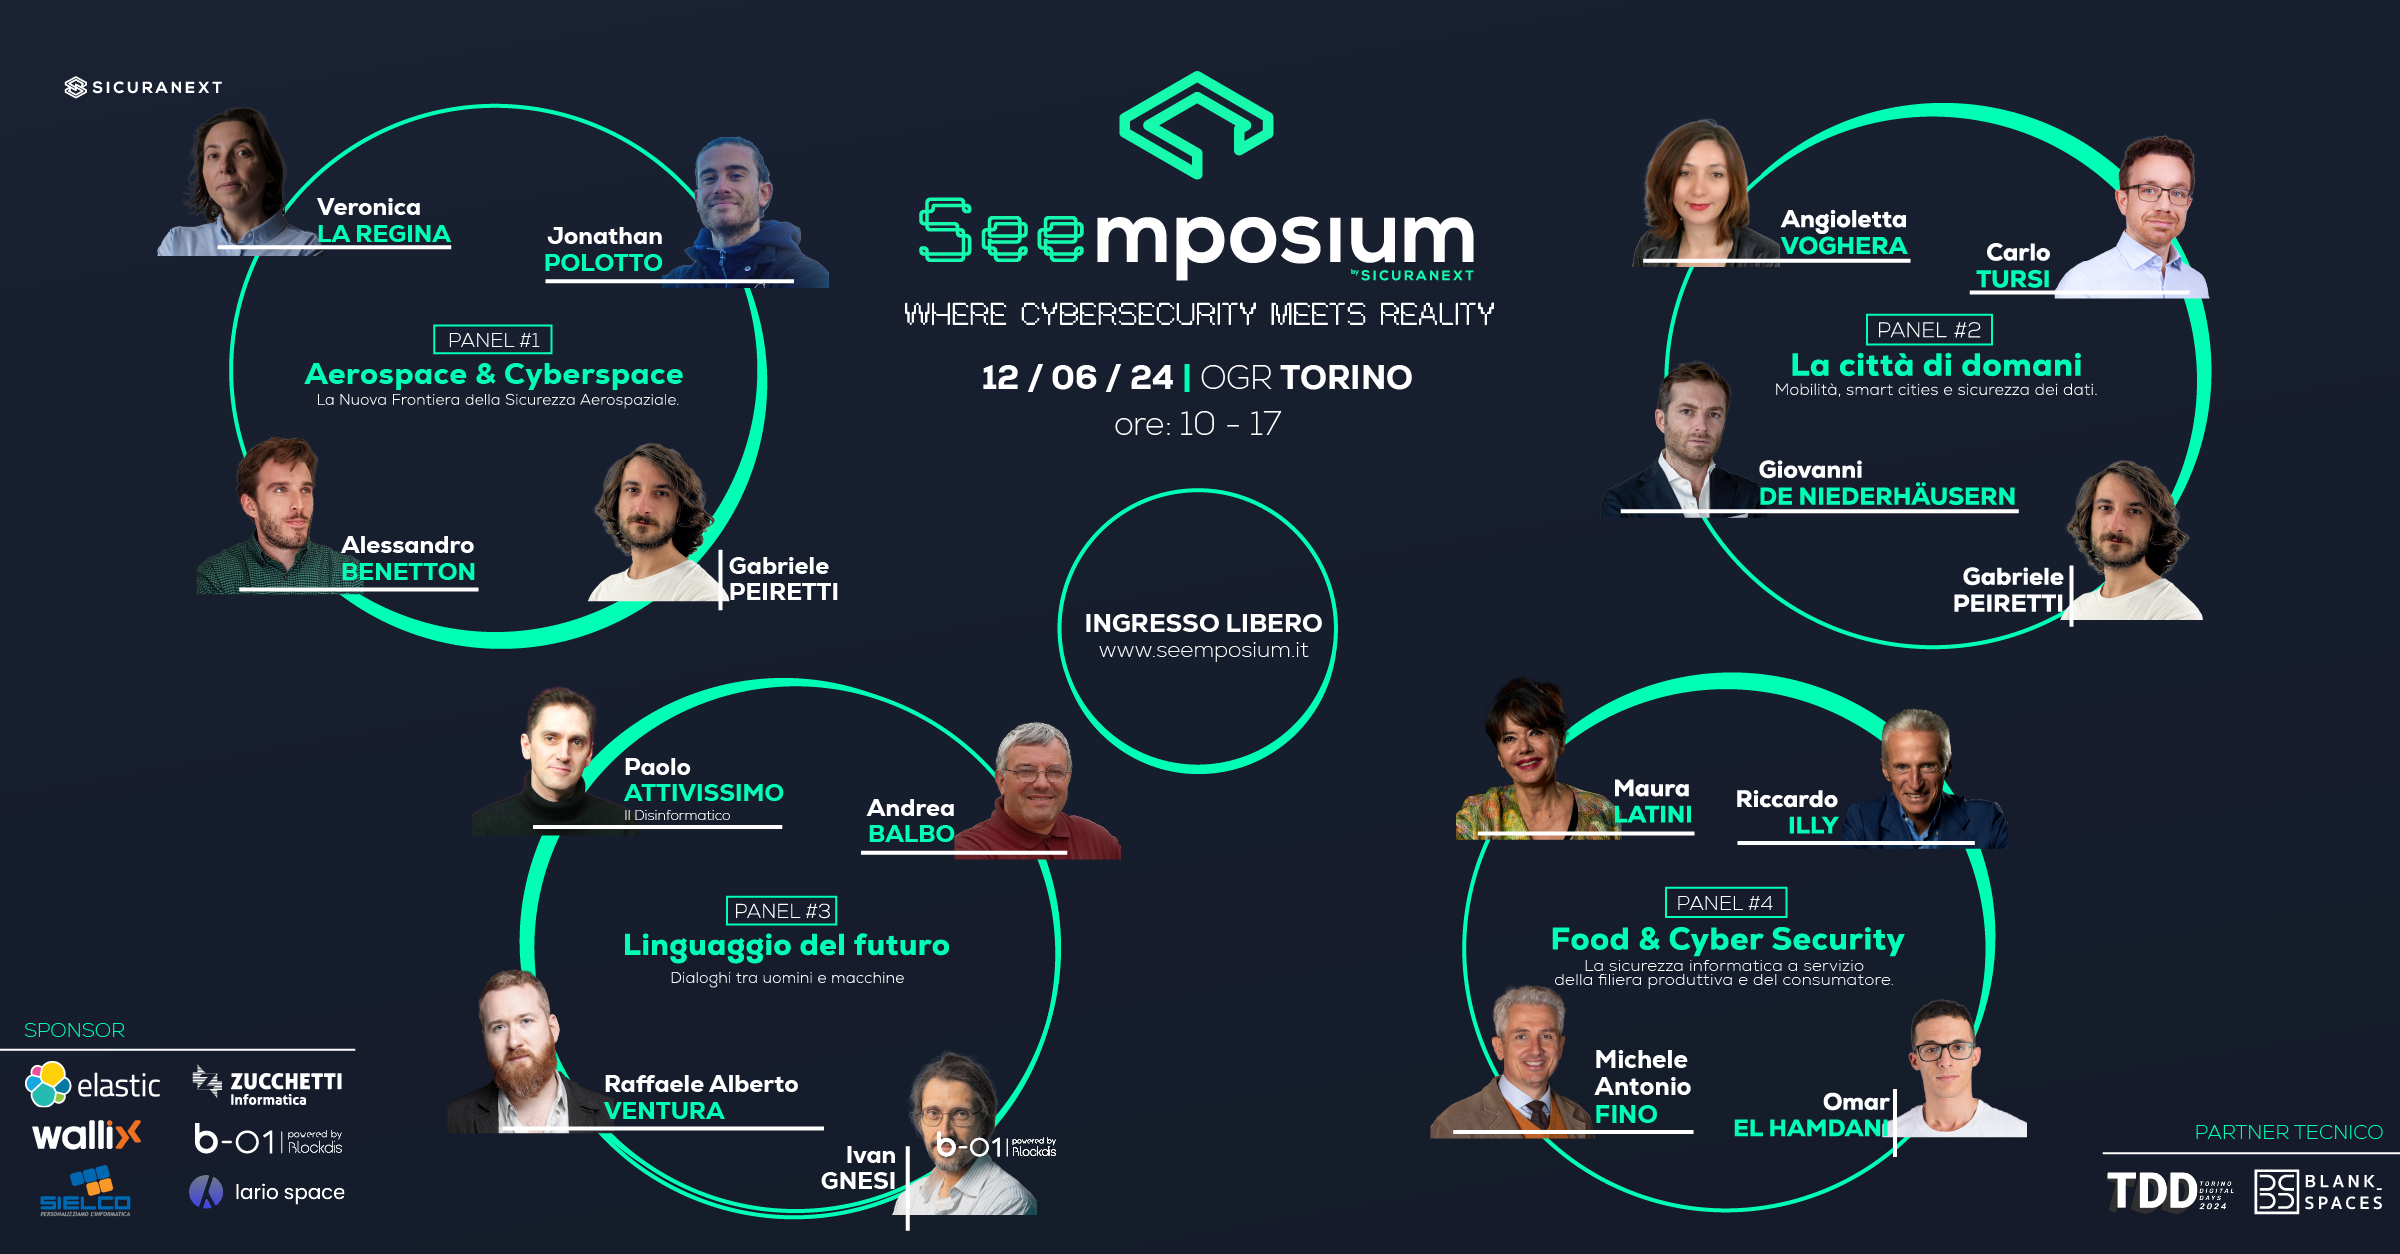 Seemposium – where cyber security meets reality